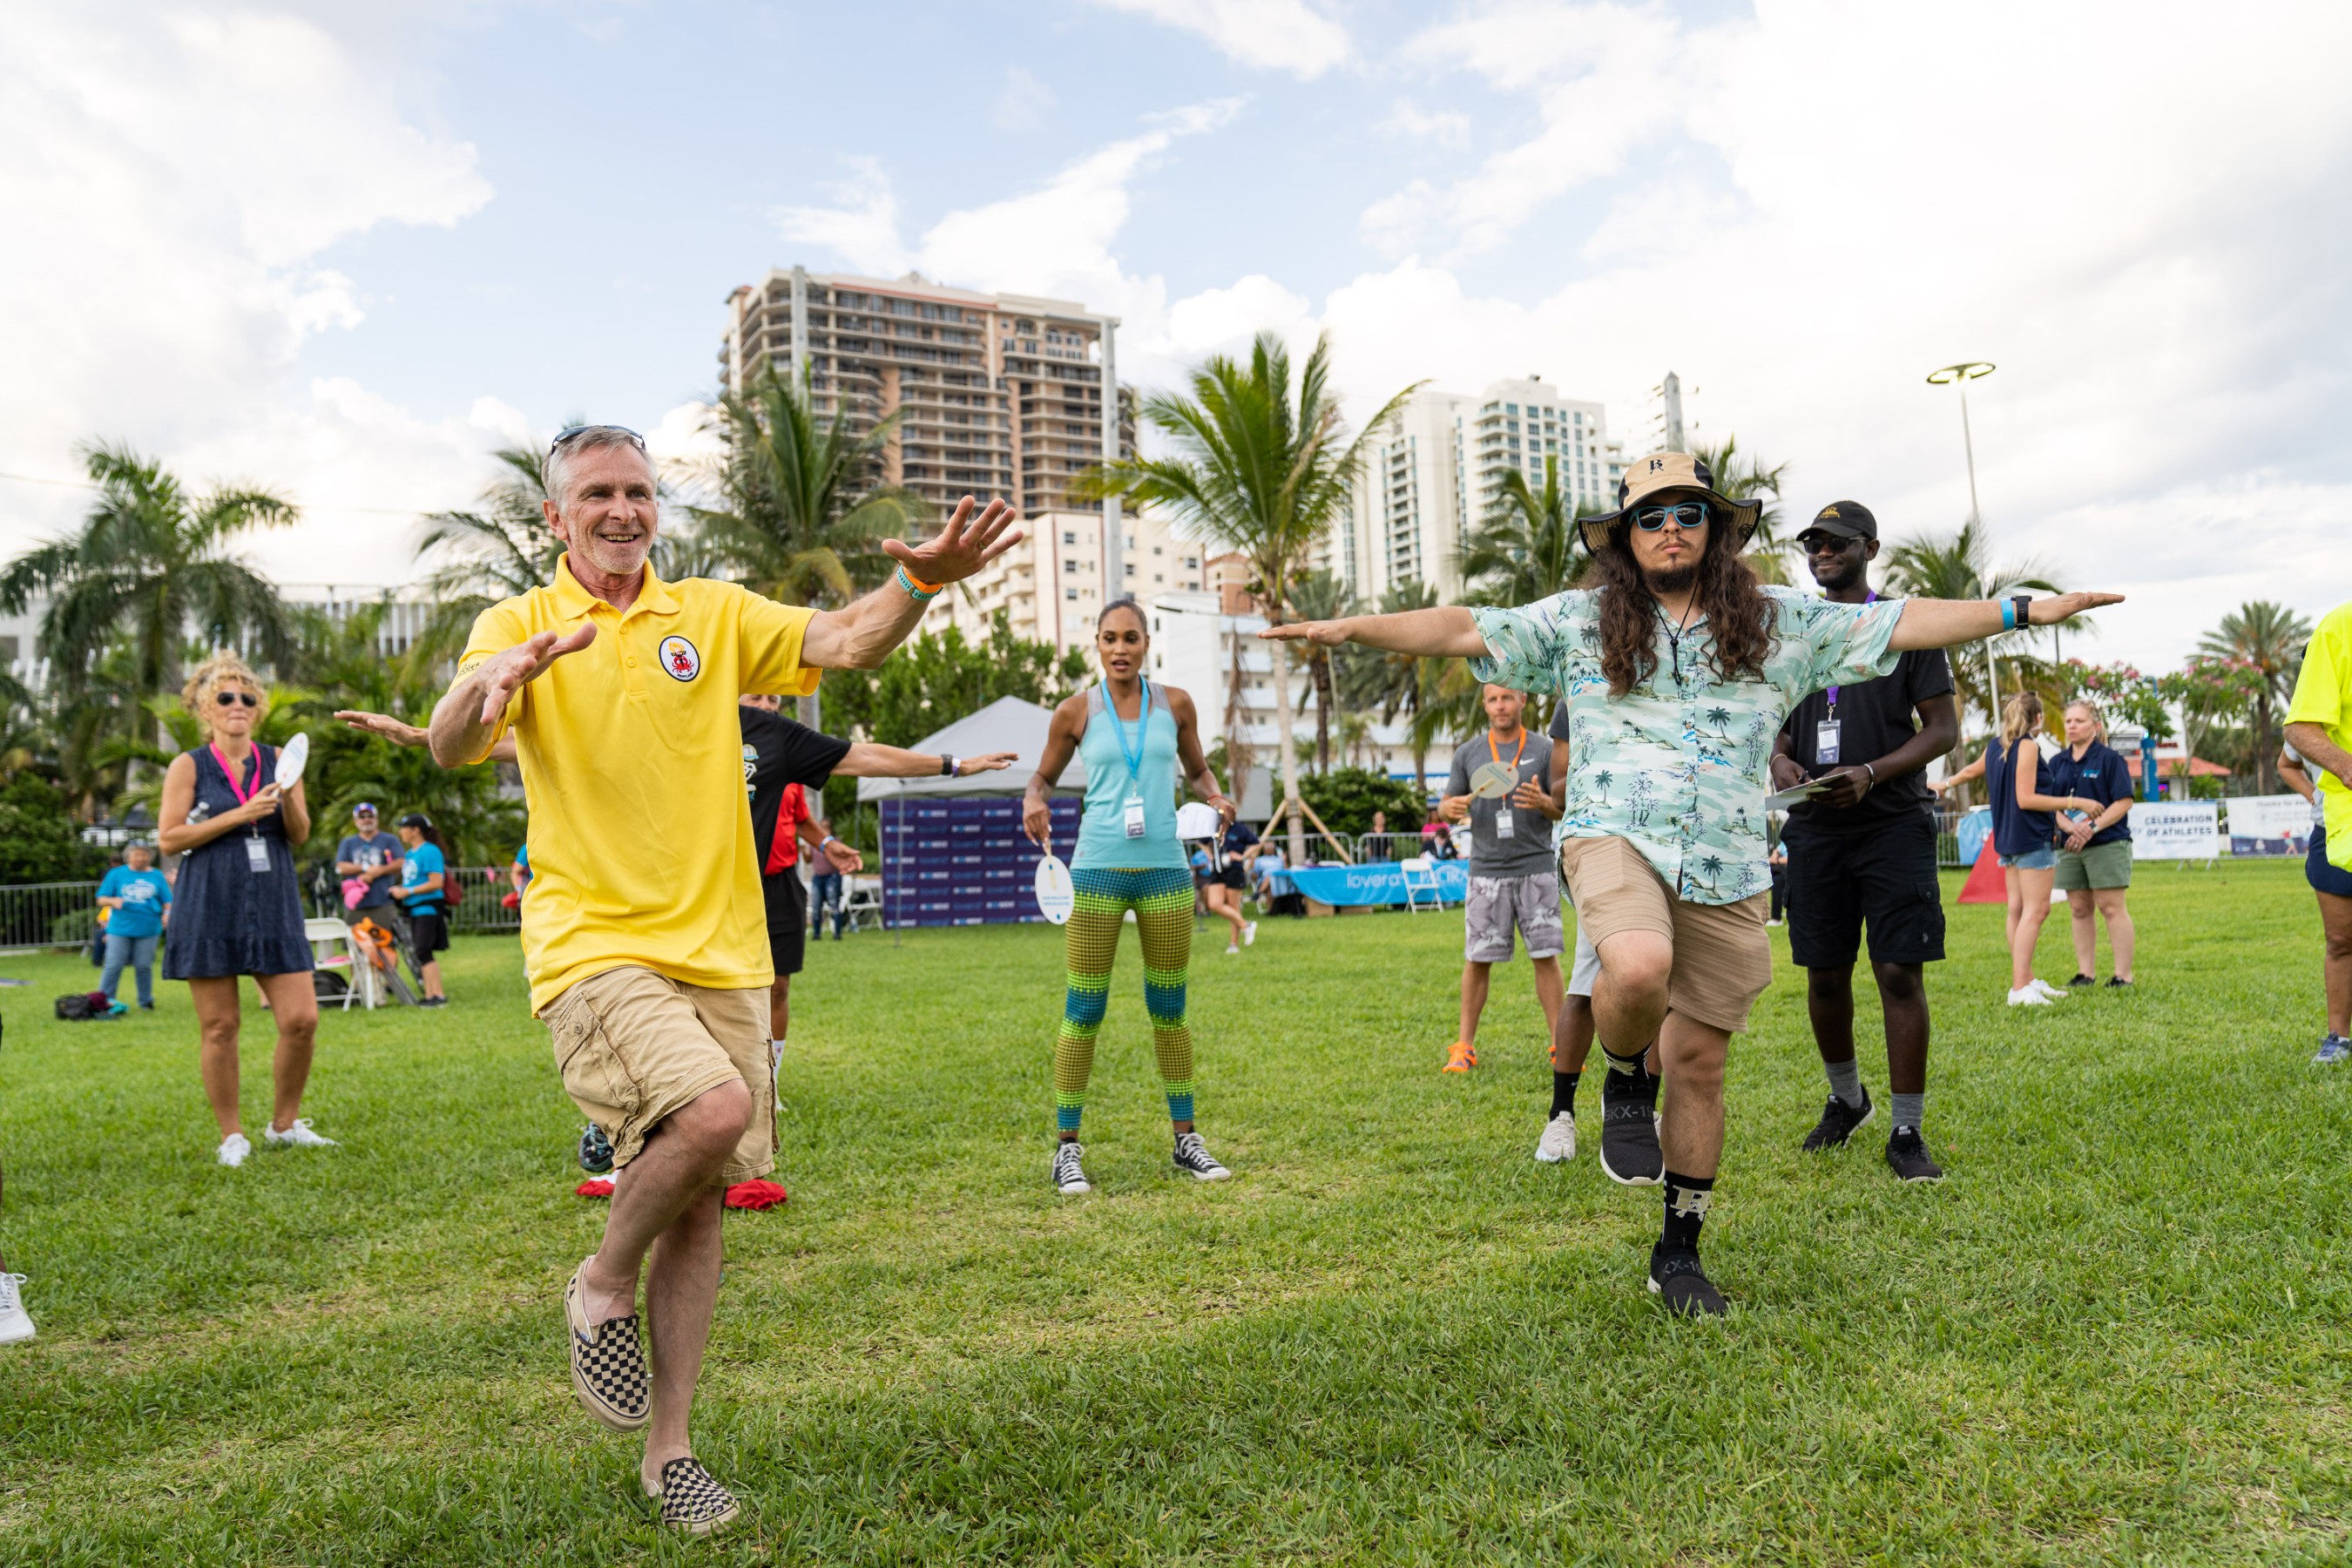 The final two participants compete in the GUINNESS WORLD RECORDS™ attempt for the Largest Game of Freeze Dance, sponsored by Pacira BioSciences, Inc. during the 2022 National Senior Games in Fort Lauderdale, Florida